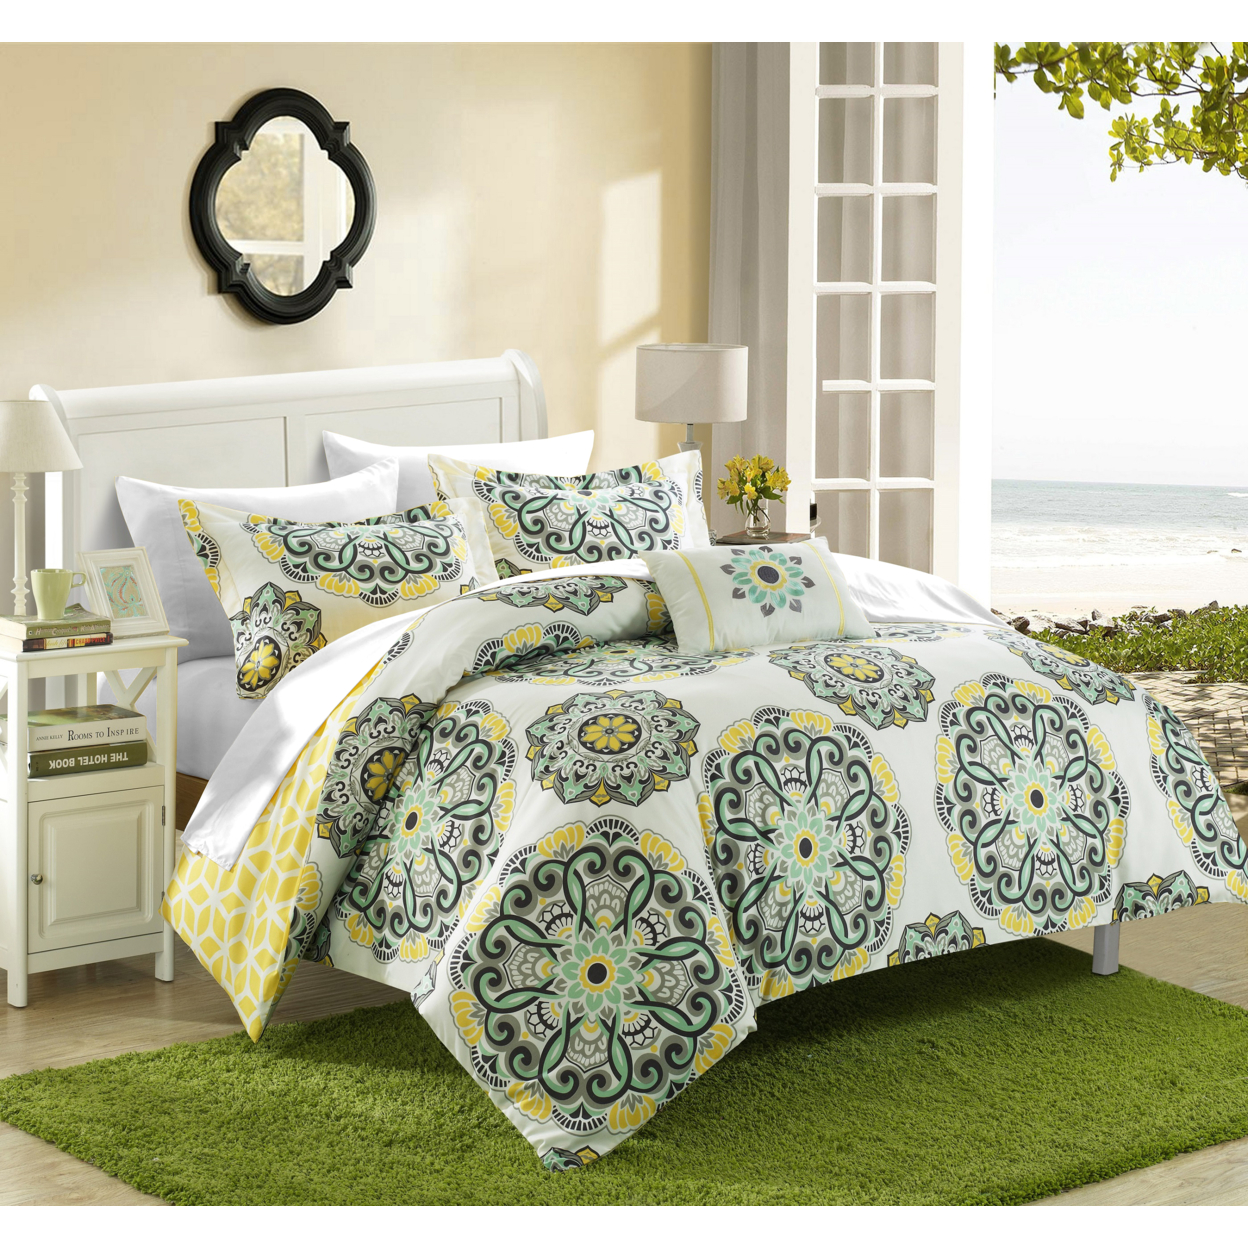 8 Or 6 Pc. Barella Super Soft Large Printed Medallion REVERSIBLE With Geometric Printed Backing Comforter Set - Yellow, King